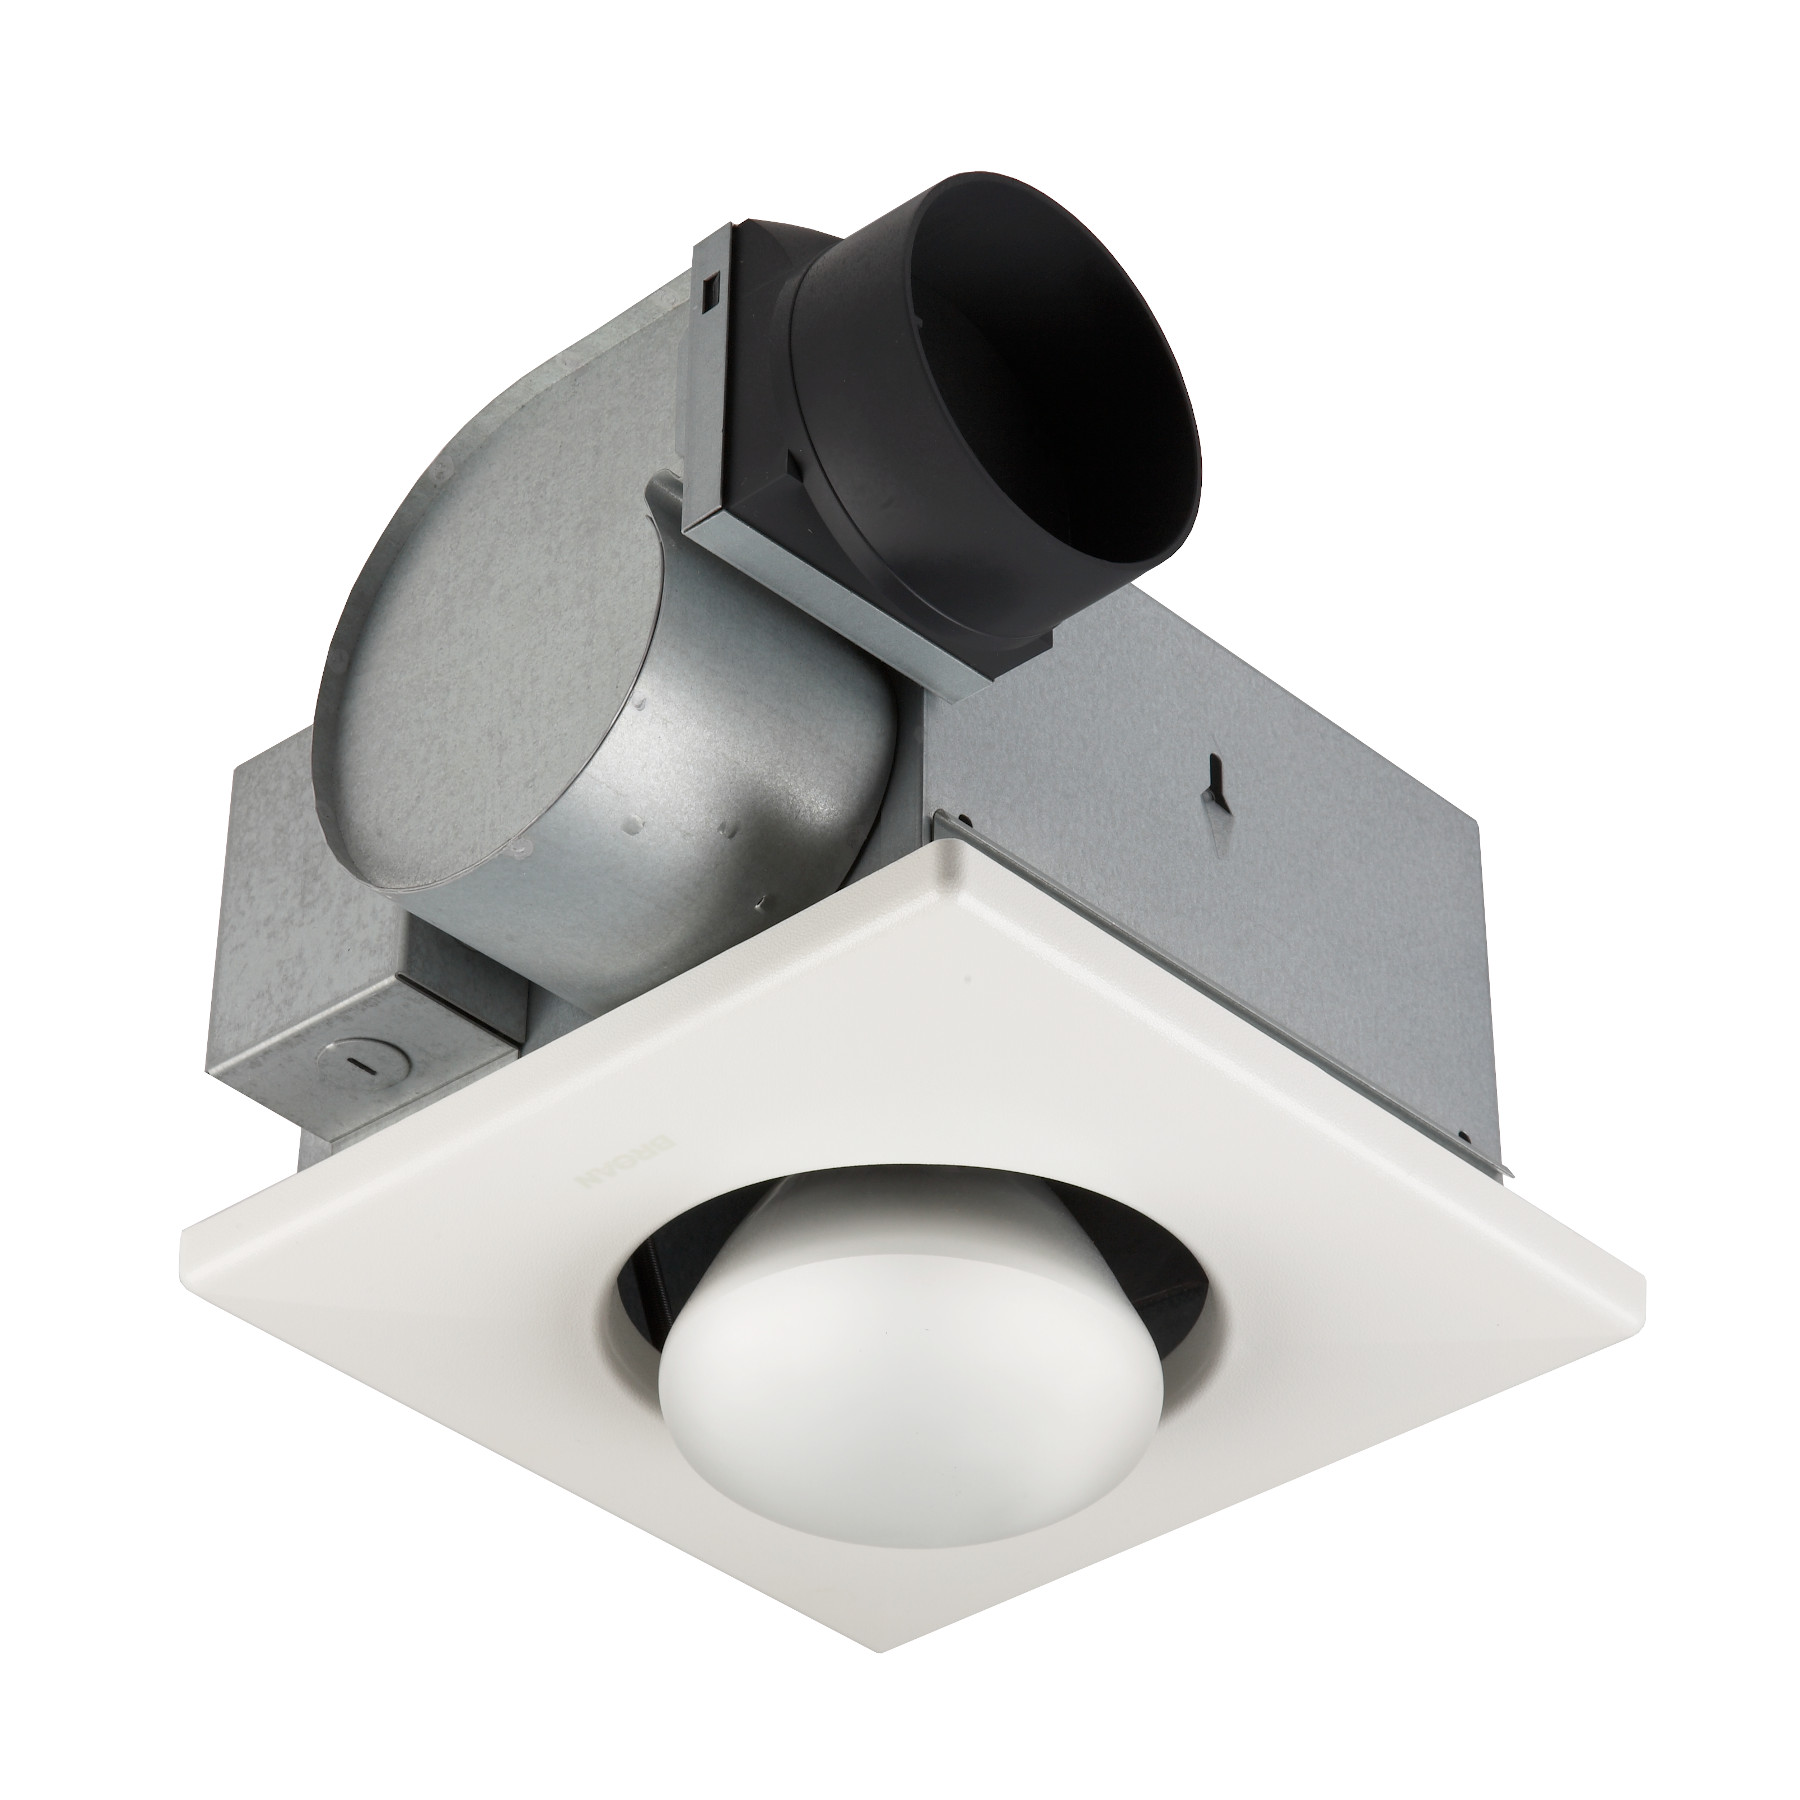 Bath And Exhaust Ventilation Fans With, Bathroom Vent Heater Light Night